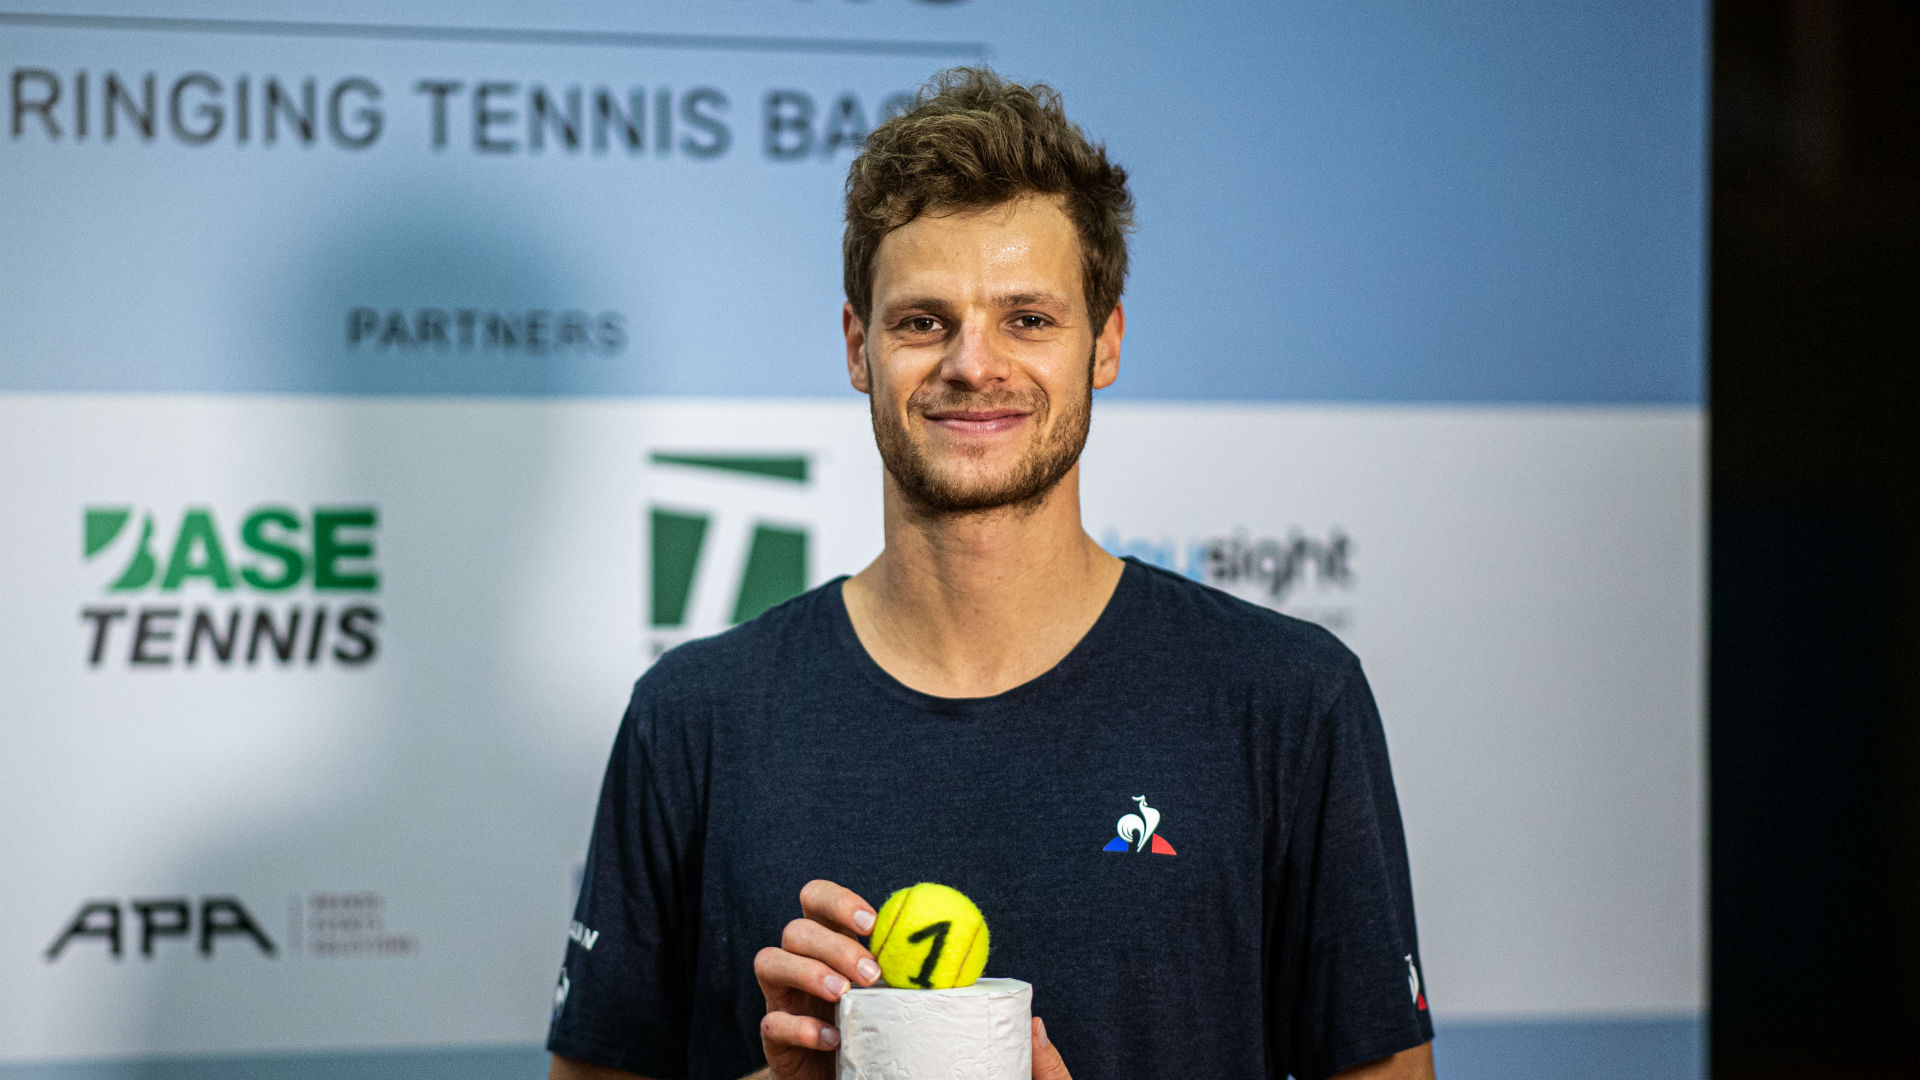 Yannick Hanfmann won the first edition of the Tennis Point Exo-Tennis exhibition in Germany.